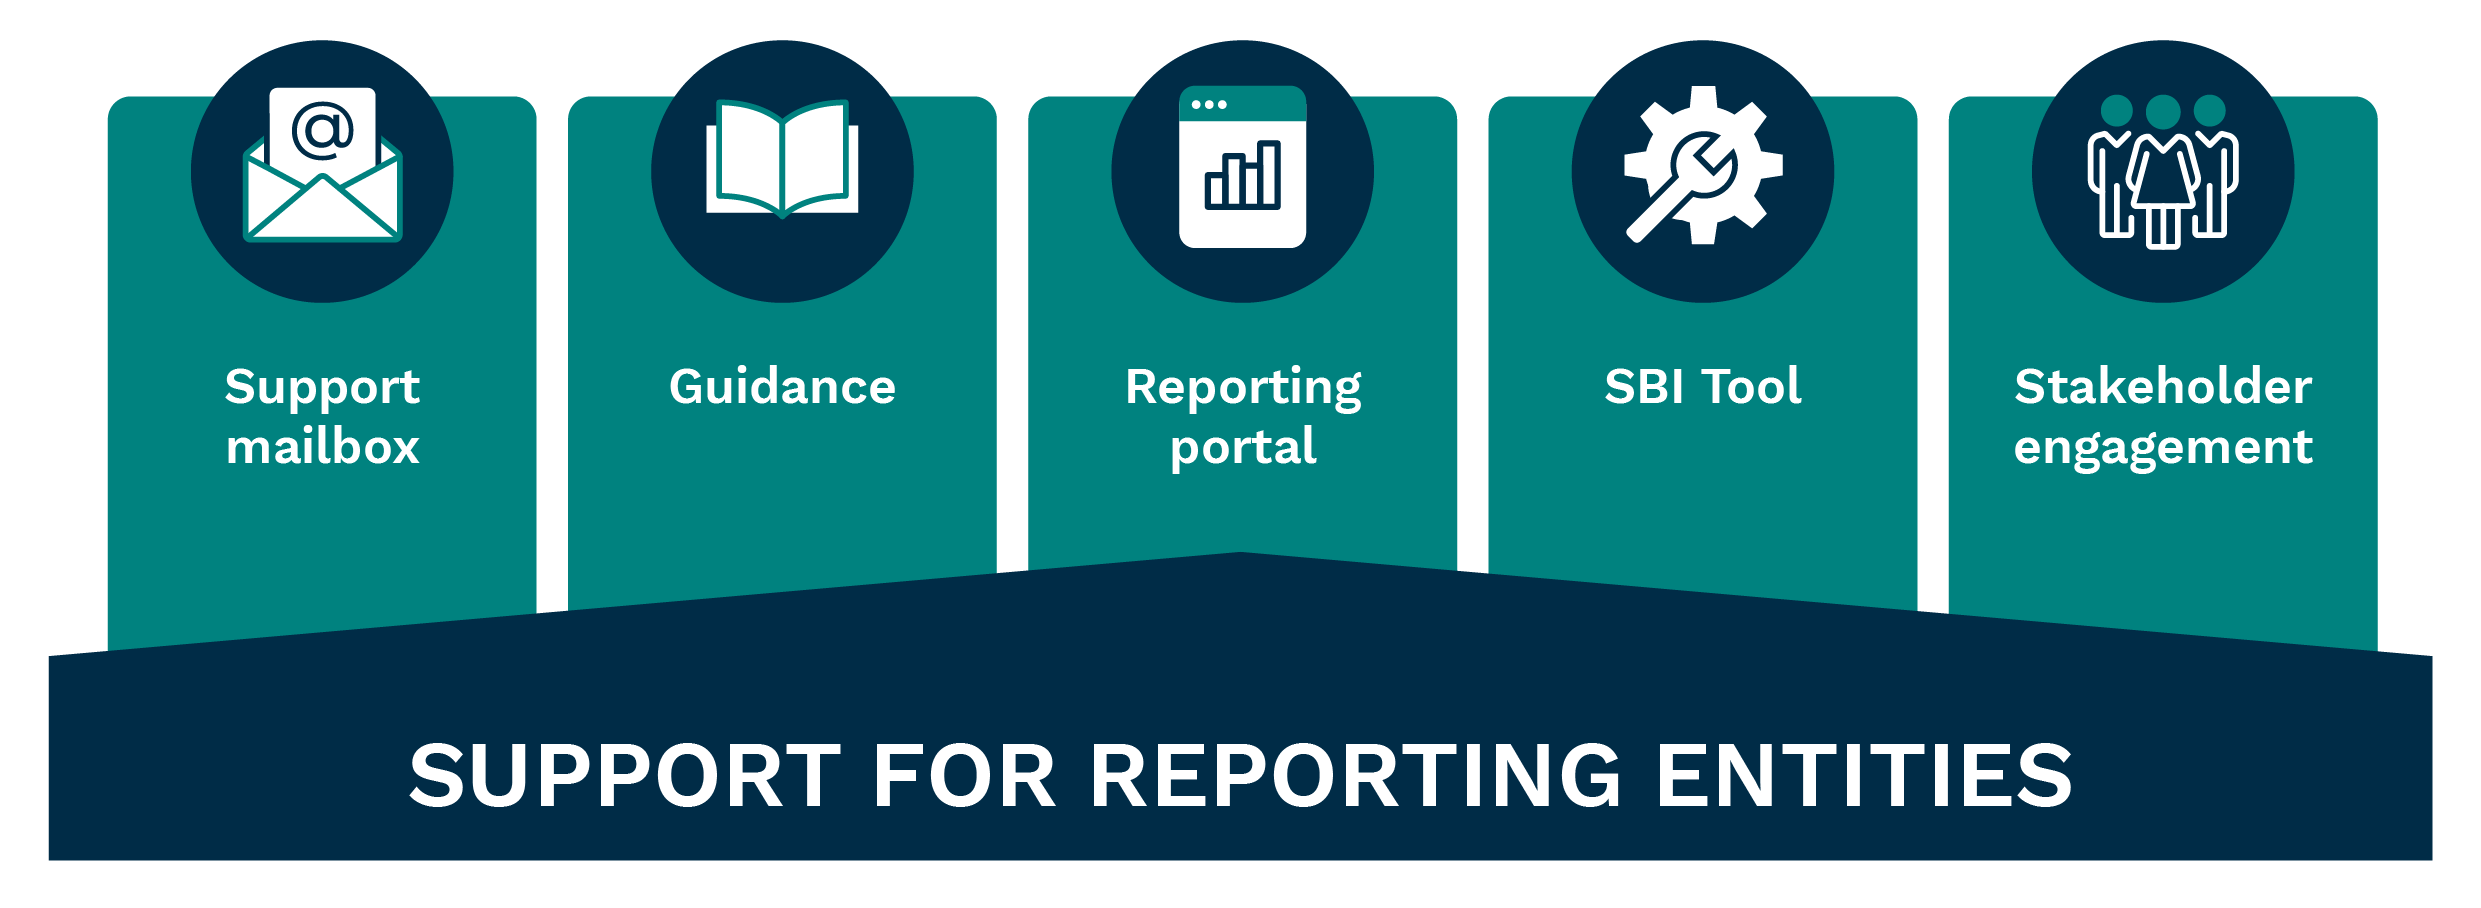 Support for reporting entities is available through mailbox support, guidance, the reporting portal, SBI Tool and stakeholder engagement.